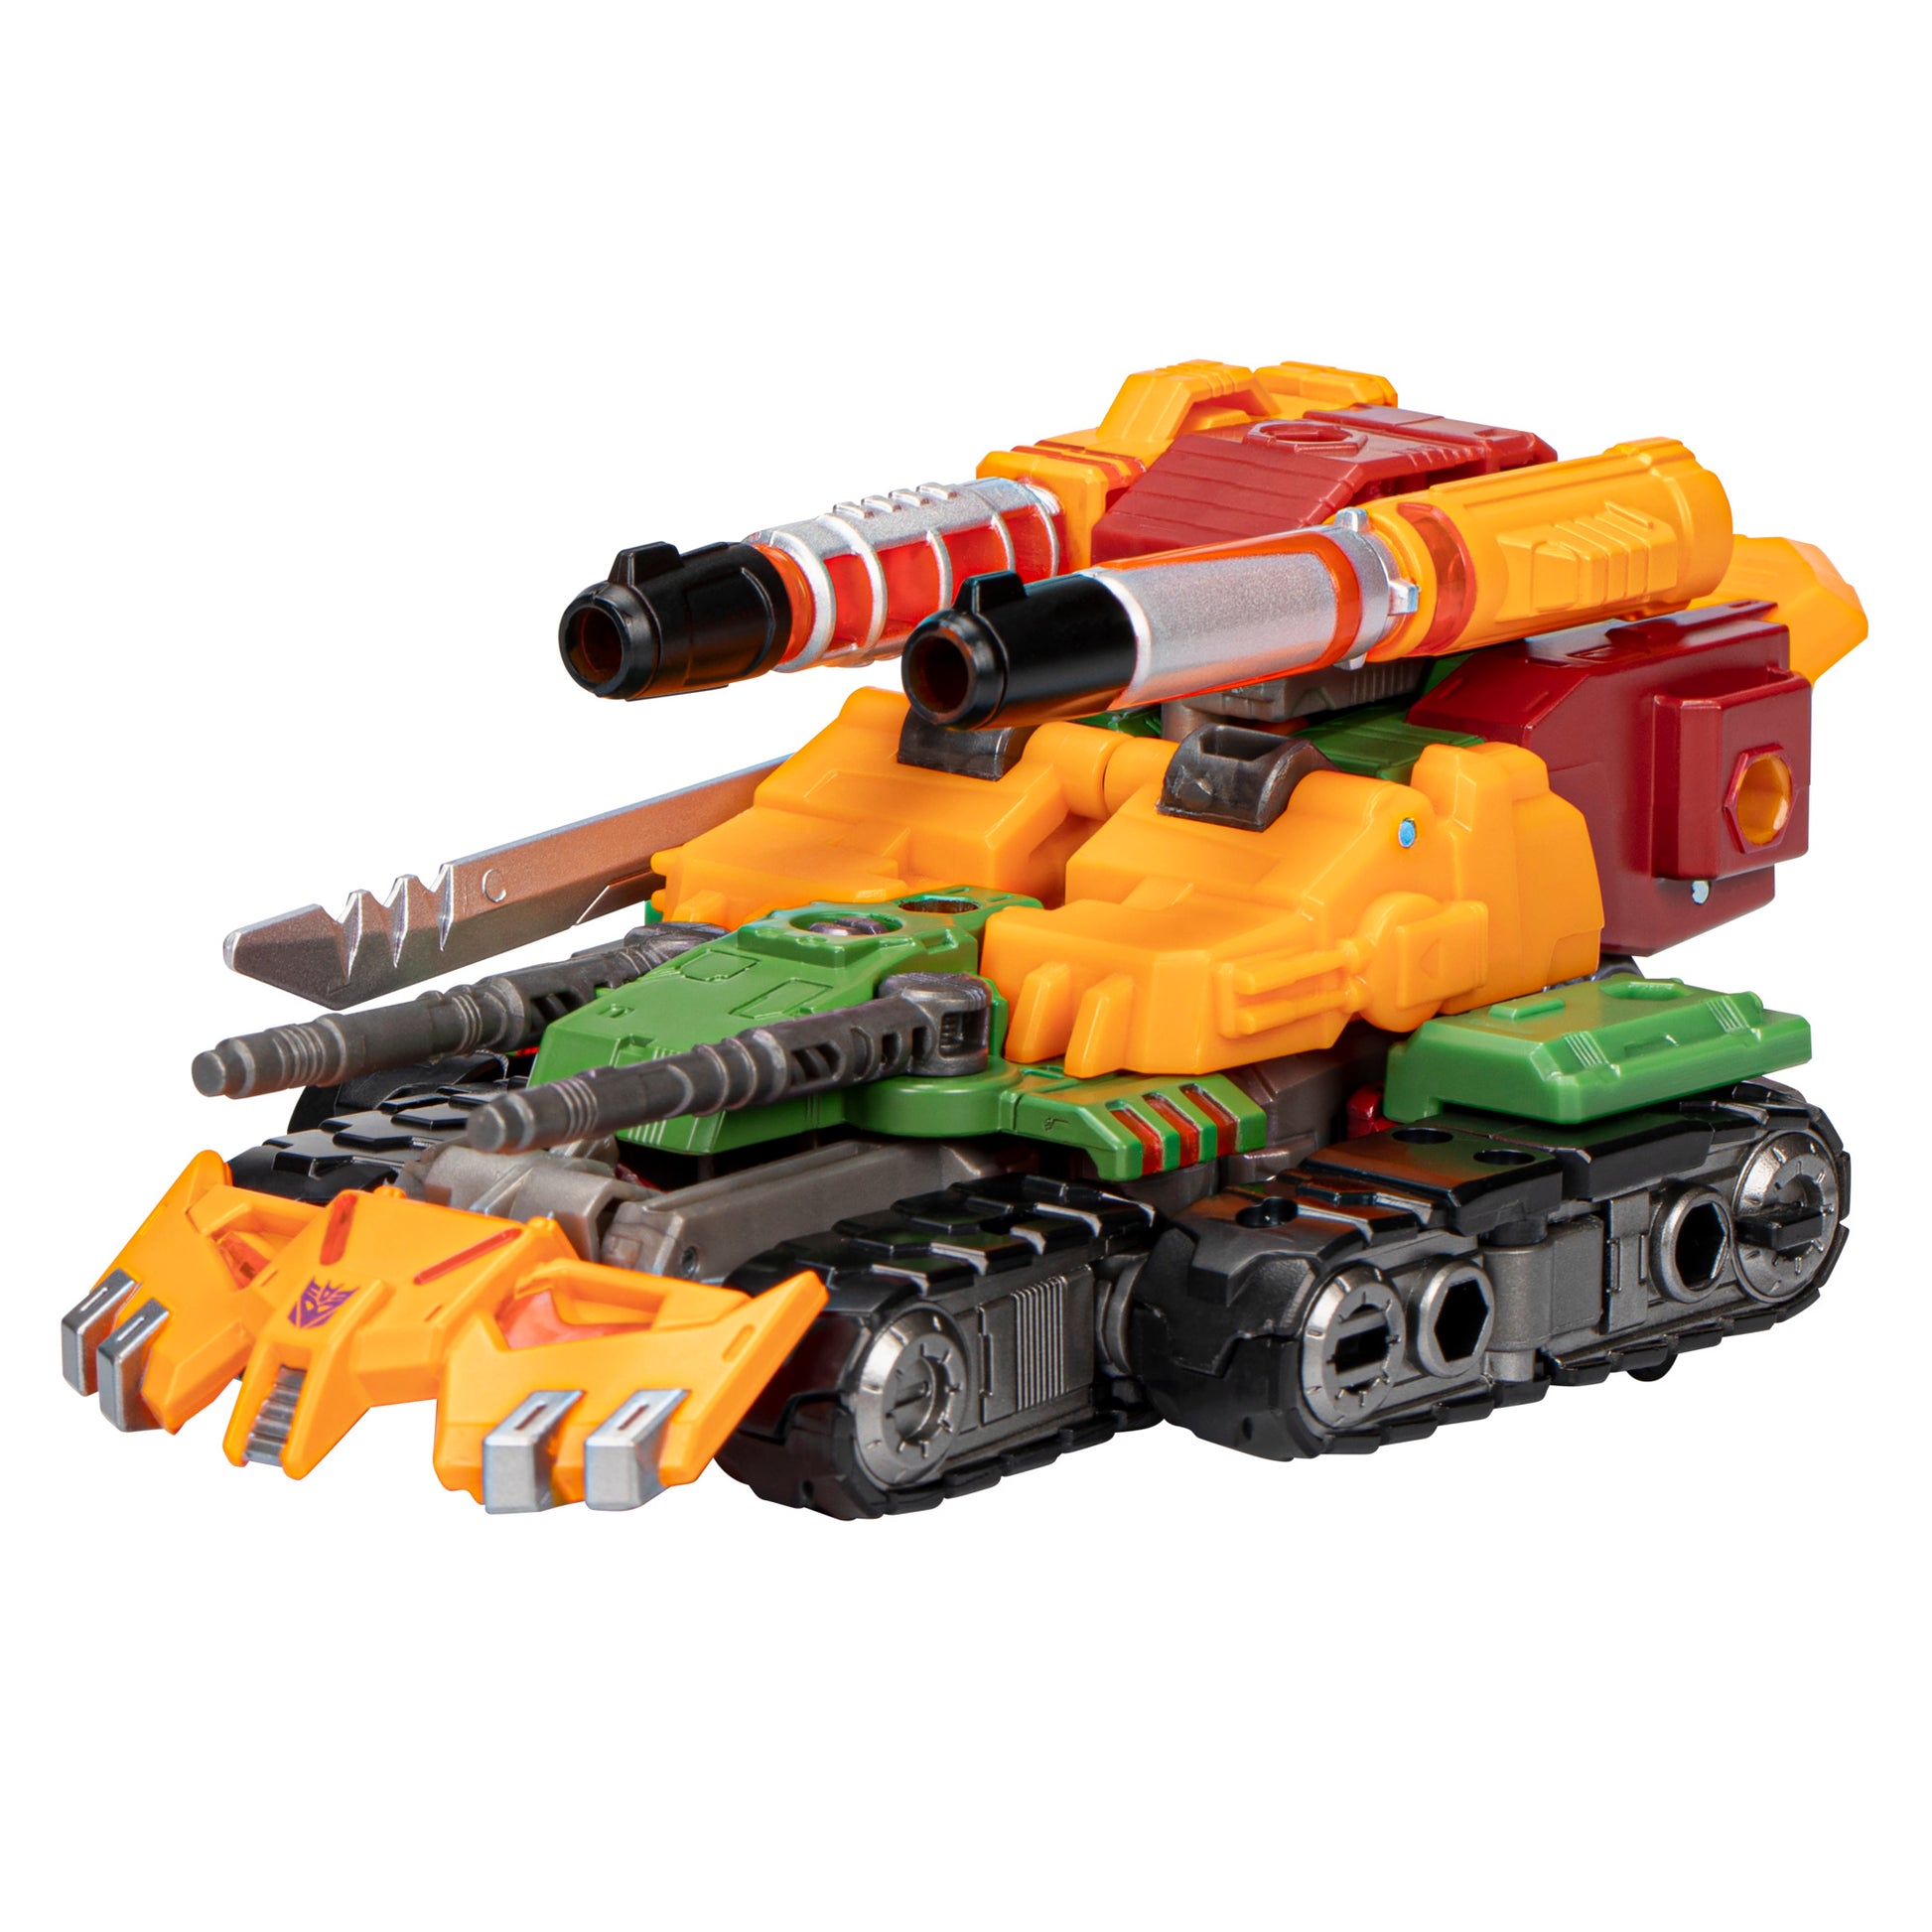 Transformers Legacy Evolution Voyager Class Comic Universe Bludgeon Action Figure Toy transformed in vehicle - Heretoserveyou